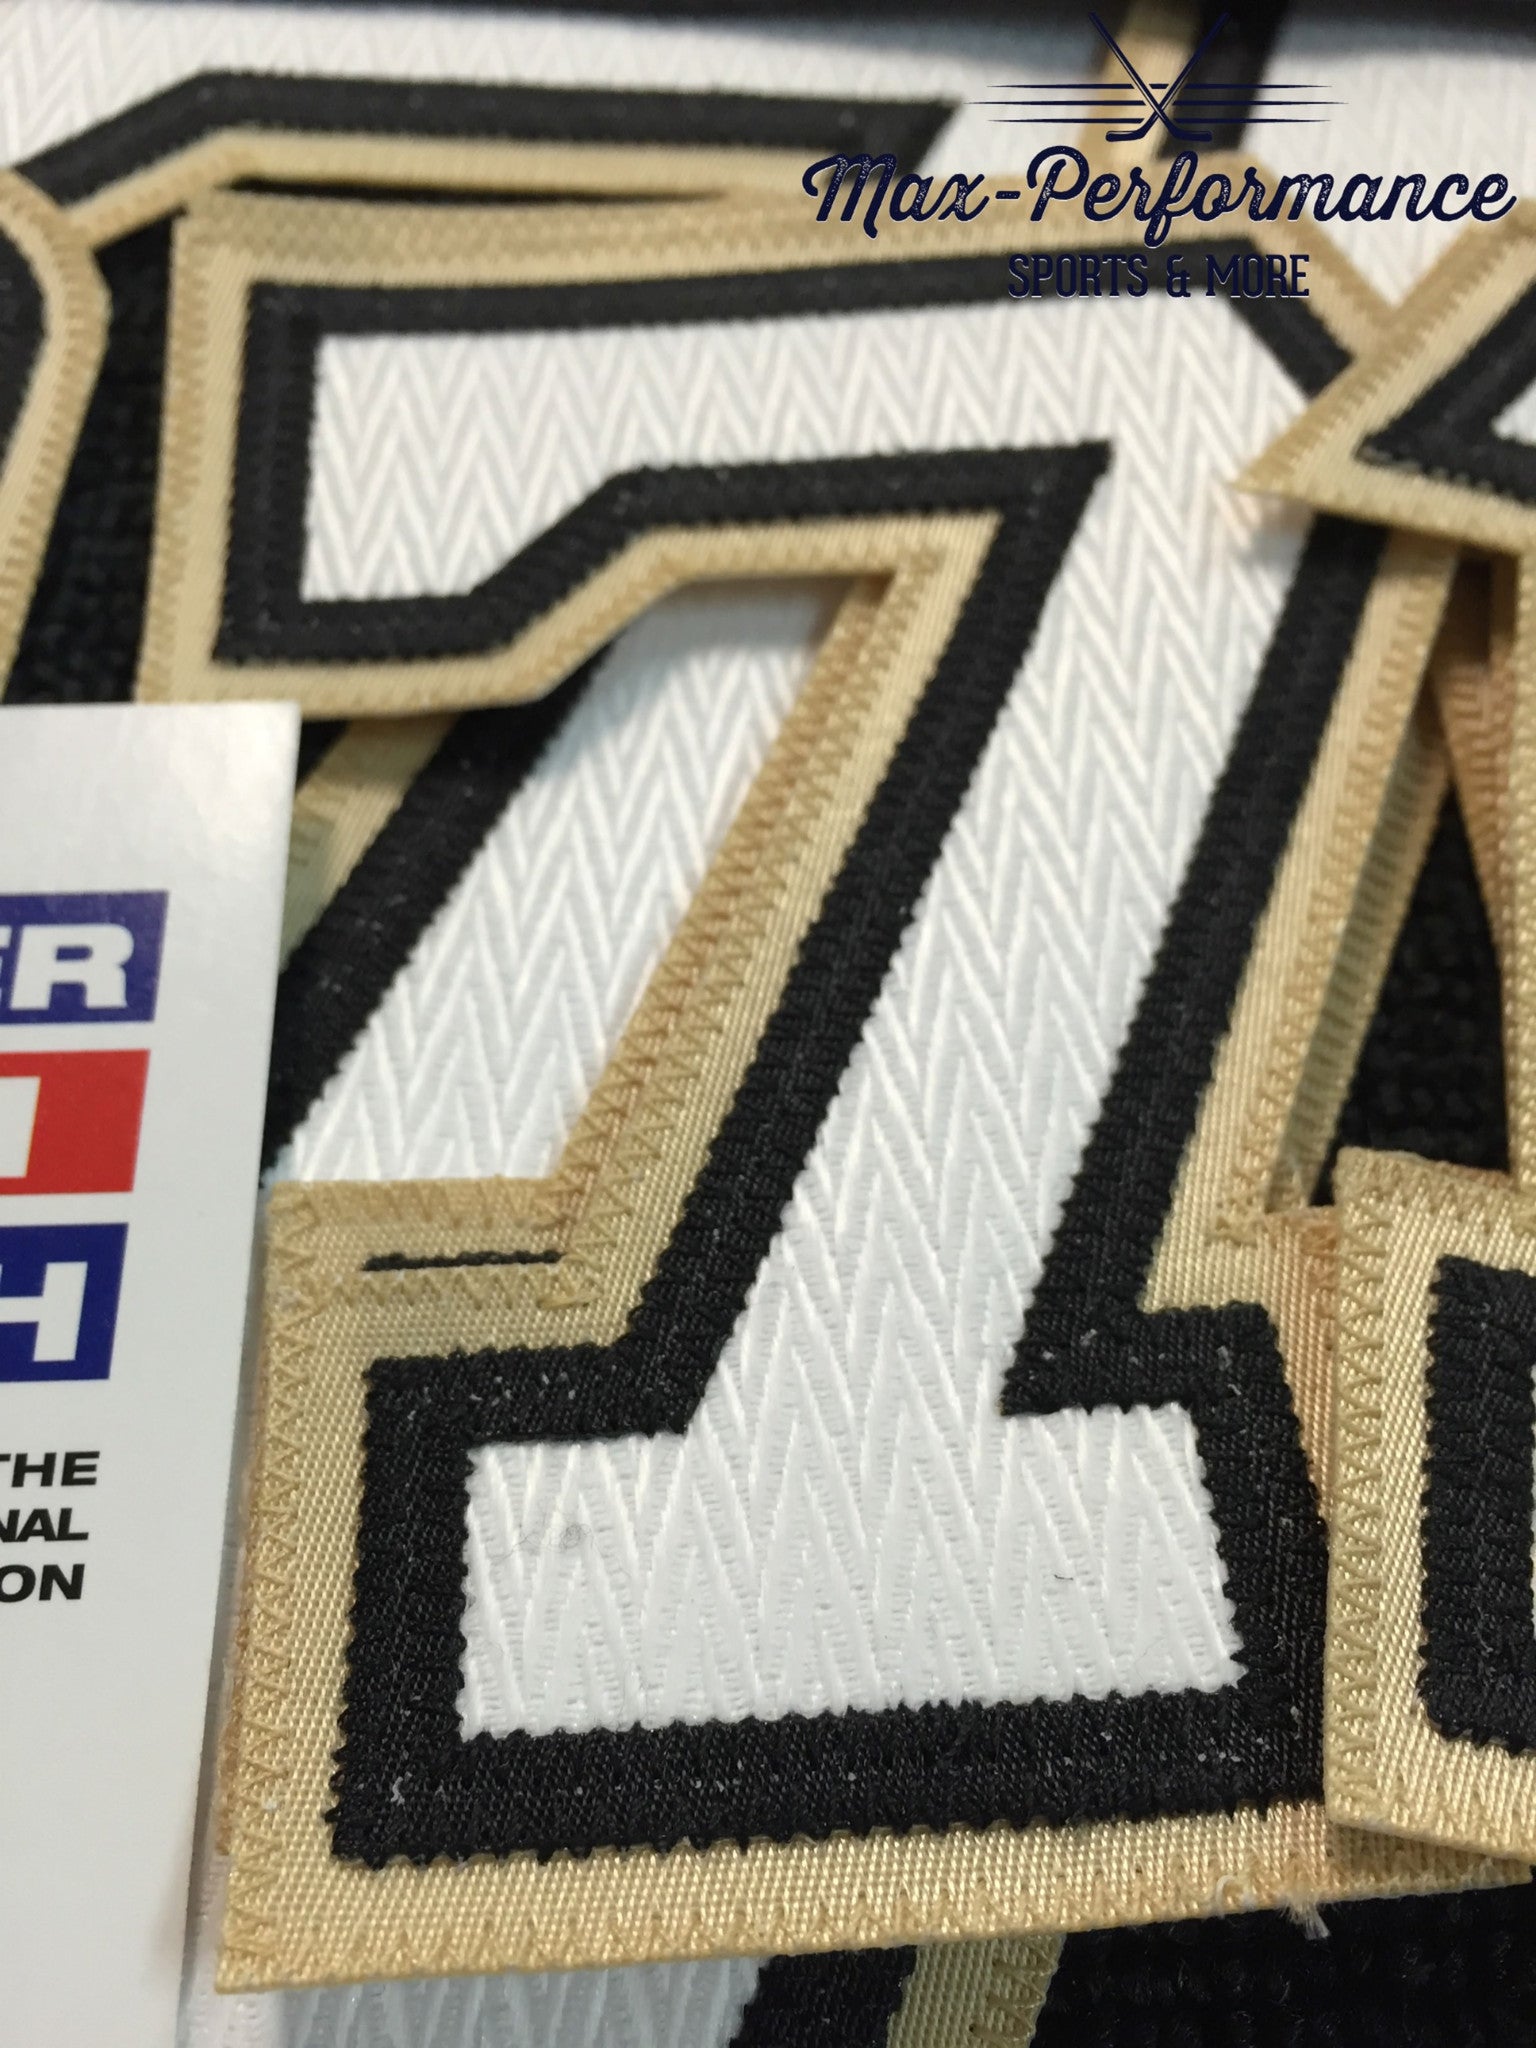 nhl jersey number kits